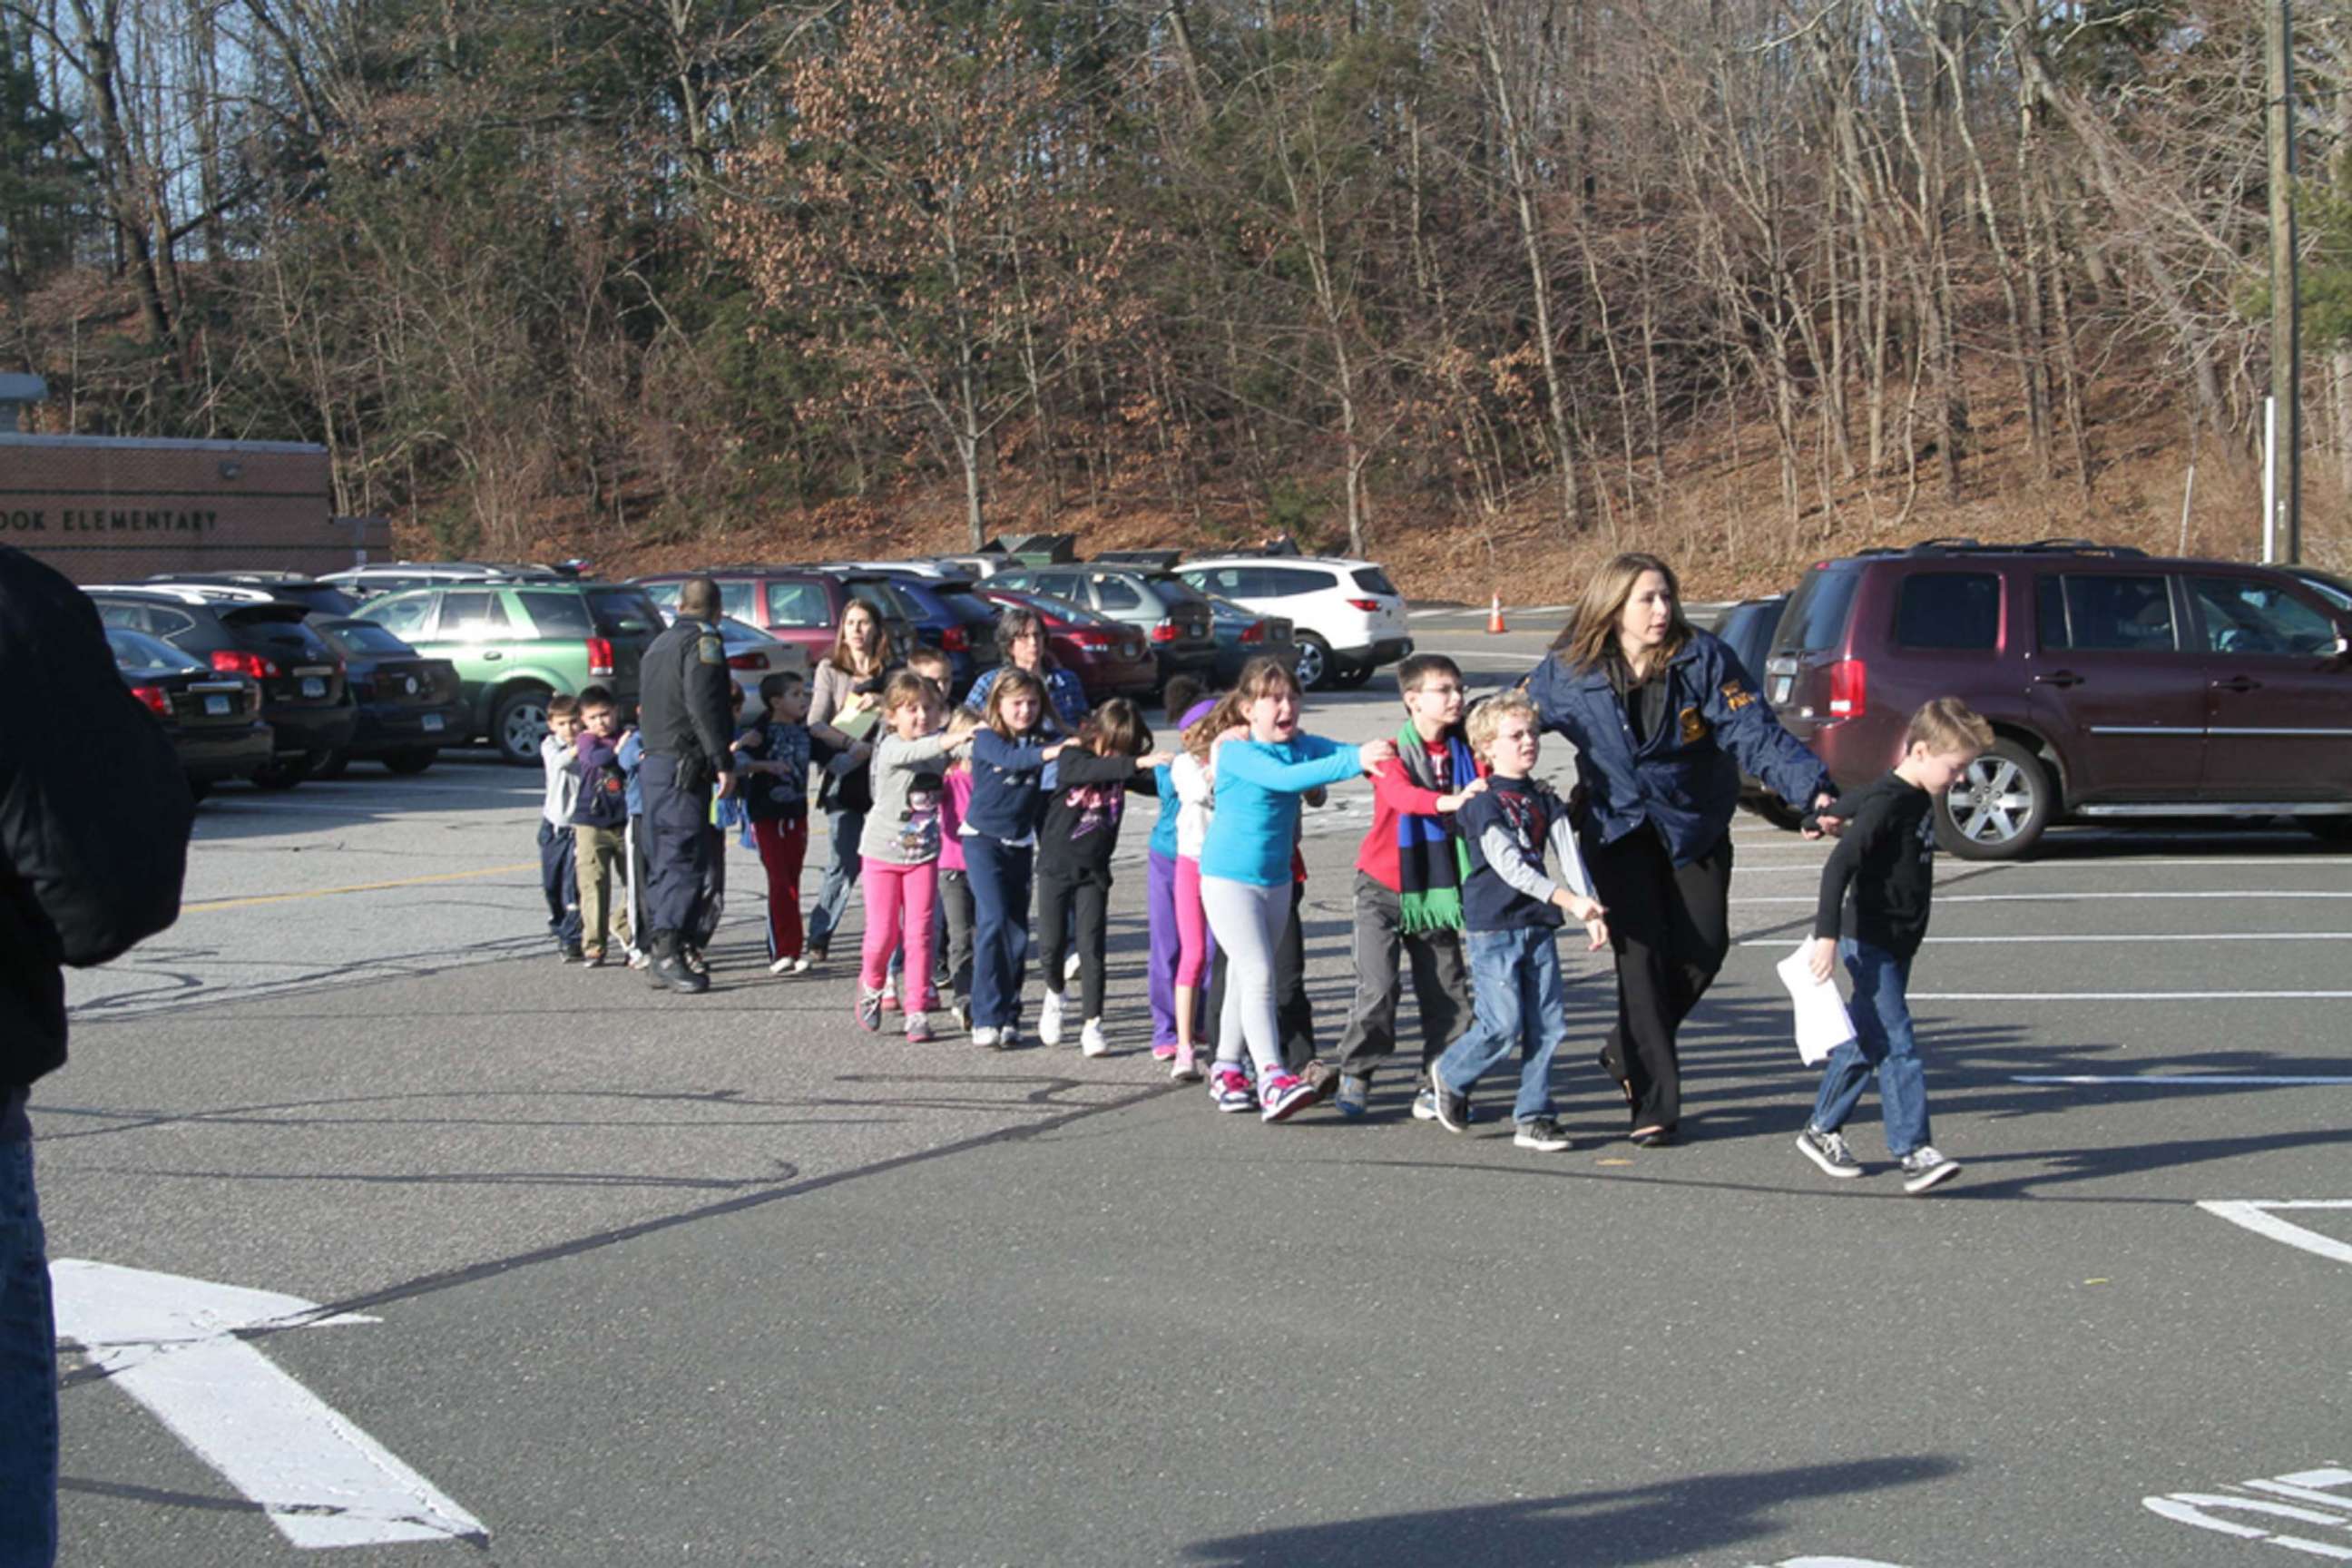 Two Connecticut State Police officers escort students and adults out of Sandy Hook Elementary School in Newtown, Conn., Dec. 14, 2012, after Adam Lanza, 20, entered the building and fatally shot 20 children and six adults before taking his own life.